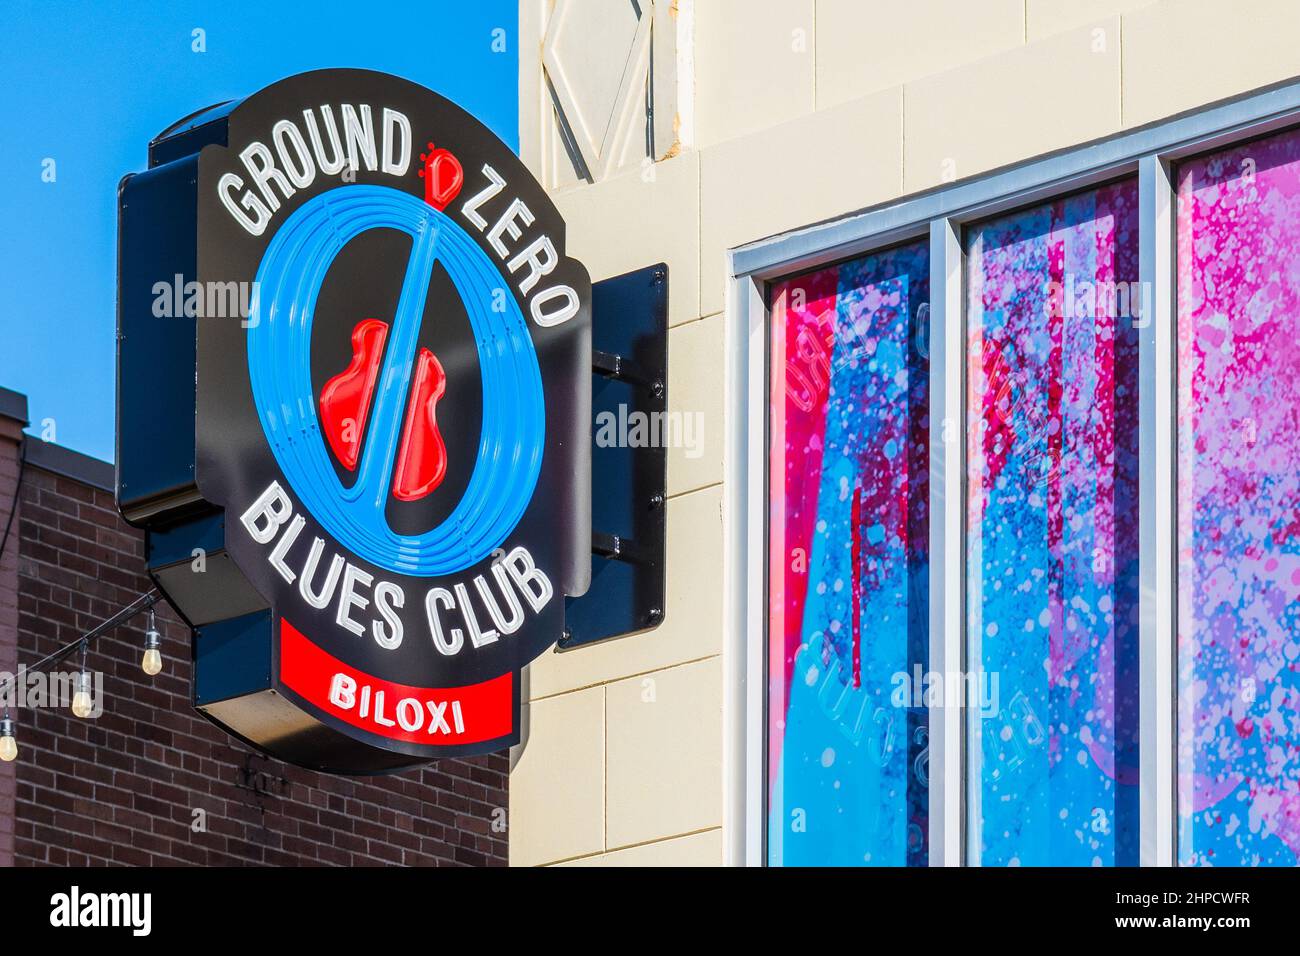 Ground Zero Blues Club, co-owned by actor Morgan Freeman, opened its second location in Feb.2022 on historic Howard Ave in Biloxi, Mississippi, USA. Stock Photo